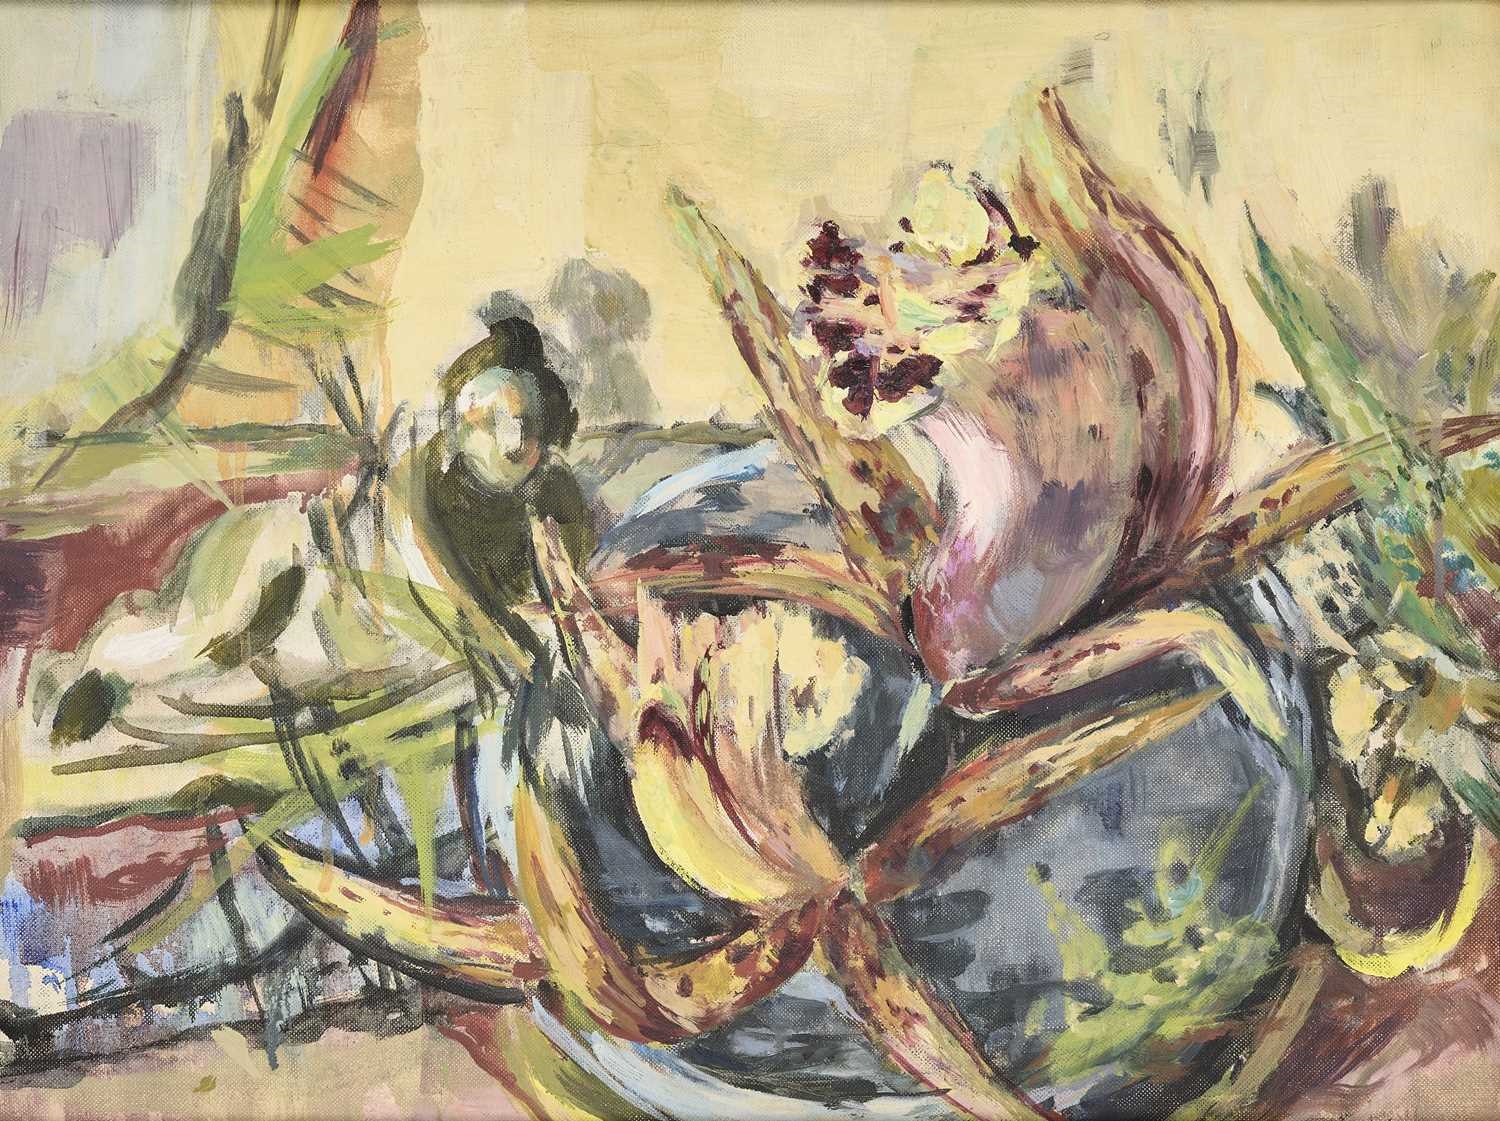 ORCHID AND FIGURE by Marie-Louise von Motesiczky, Painted in 1953